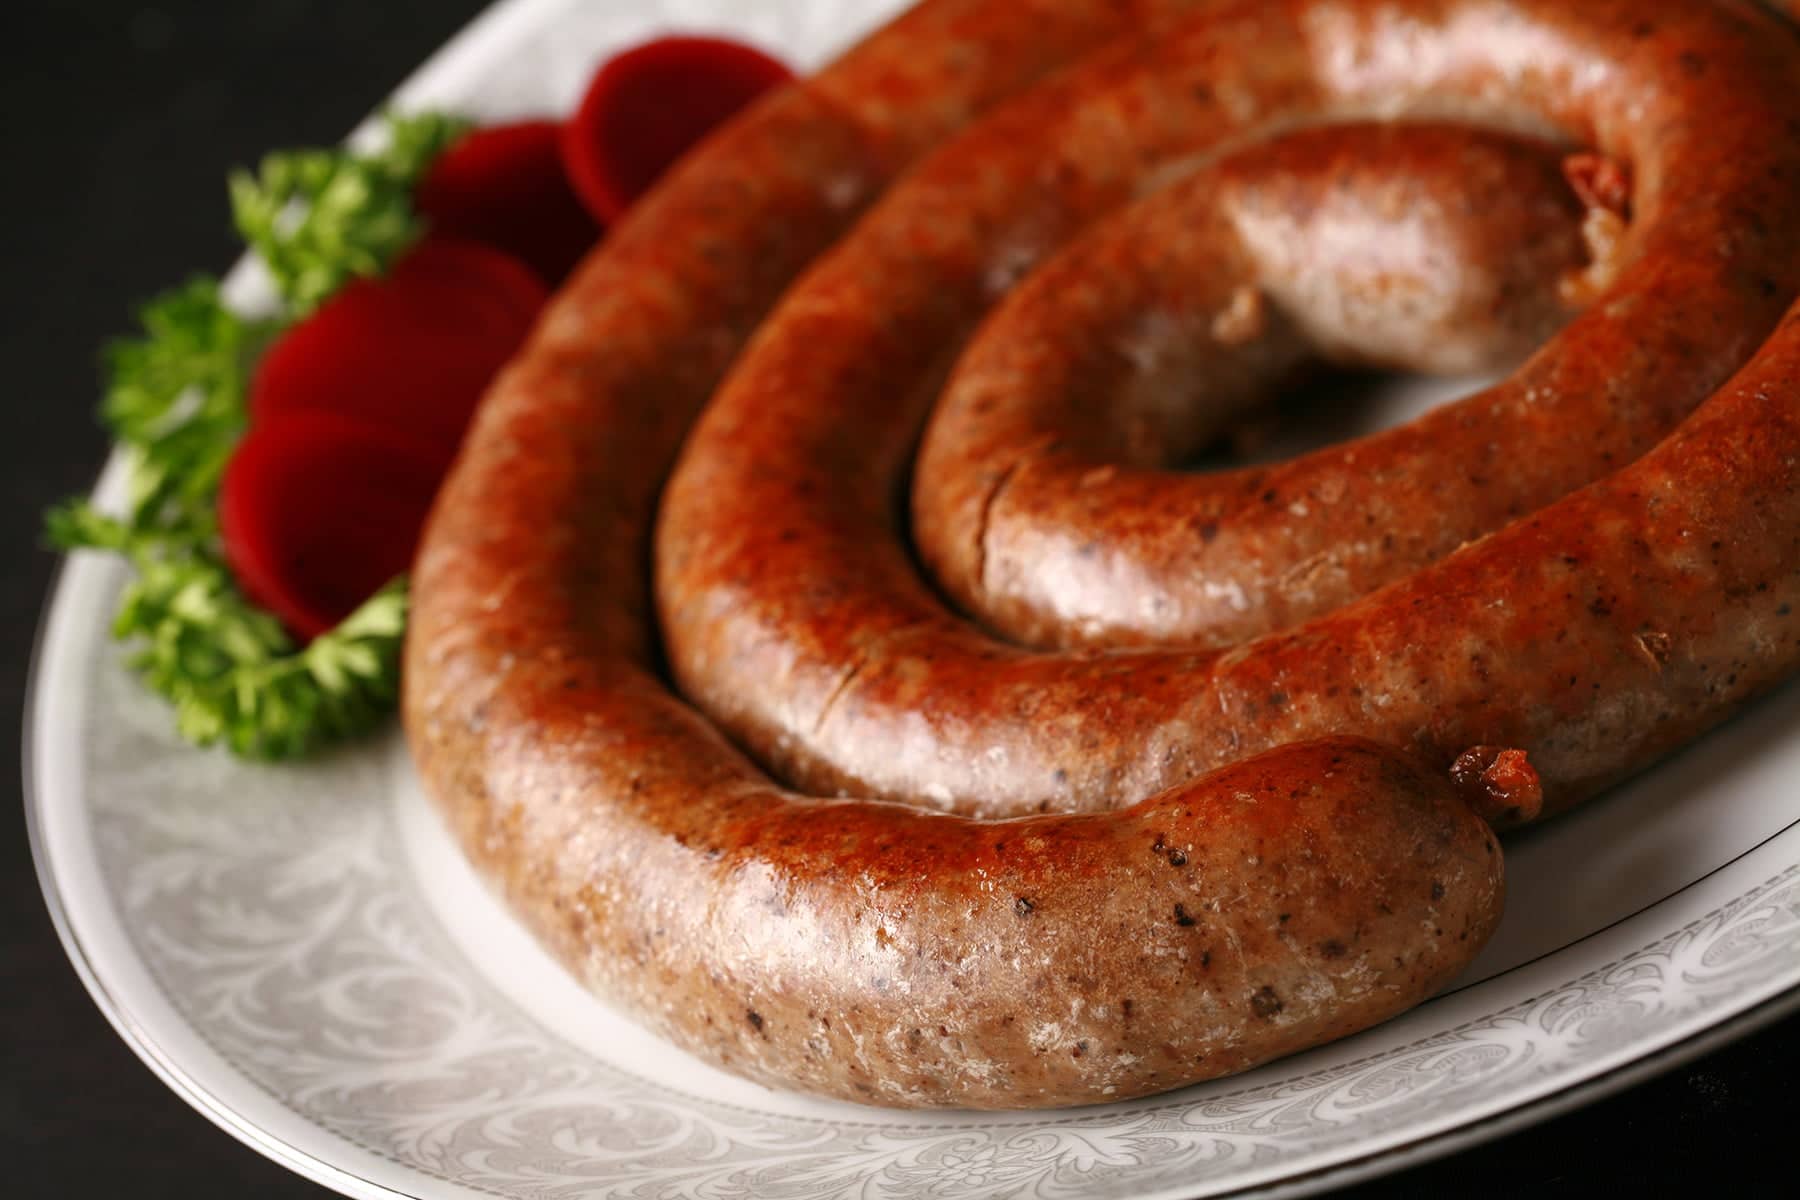 A large coil of potato sausage on a white plate. It's garnished with slices of beet pickles and some parsley.